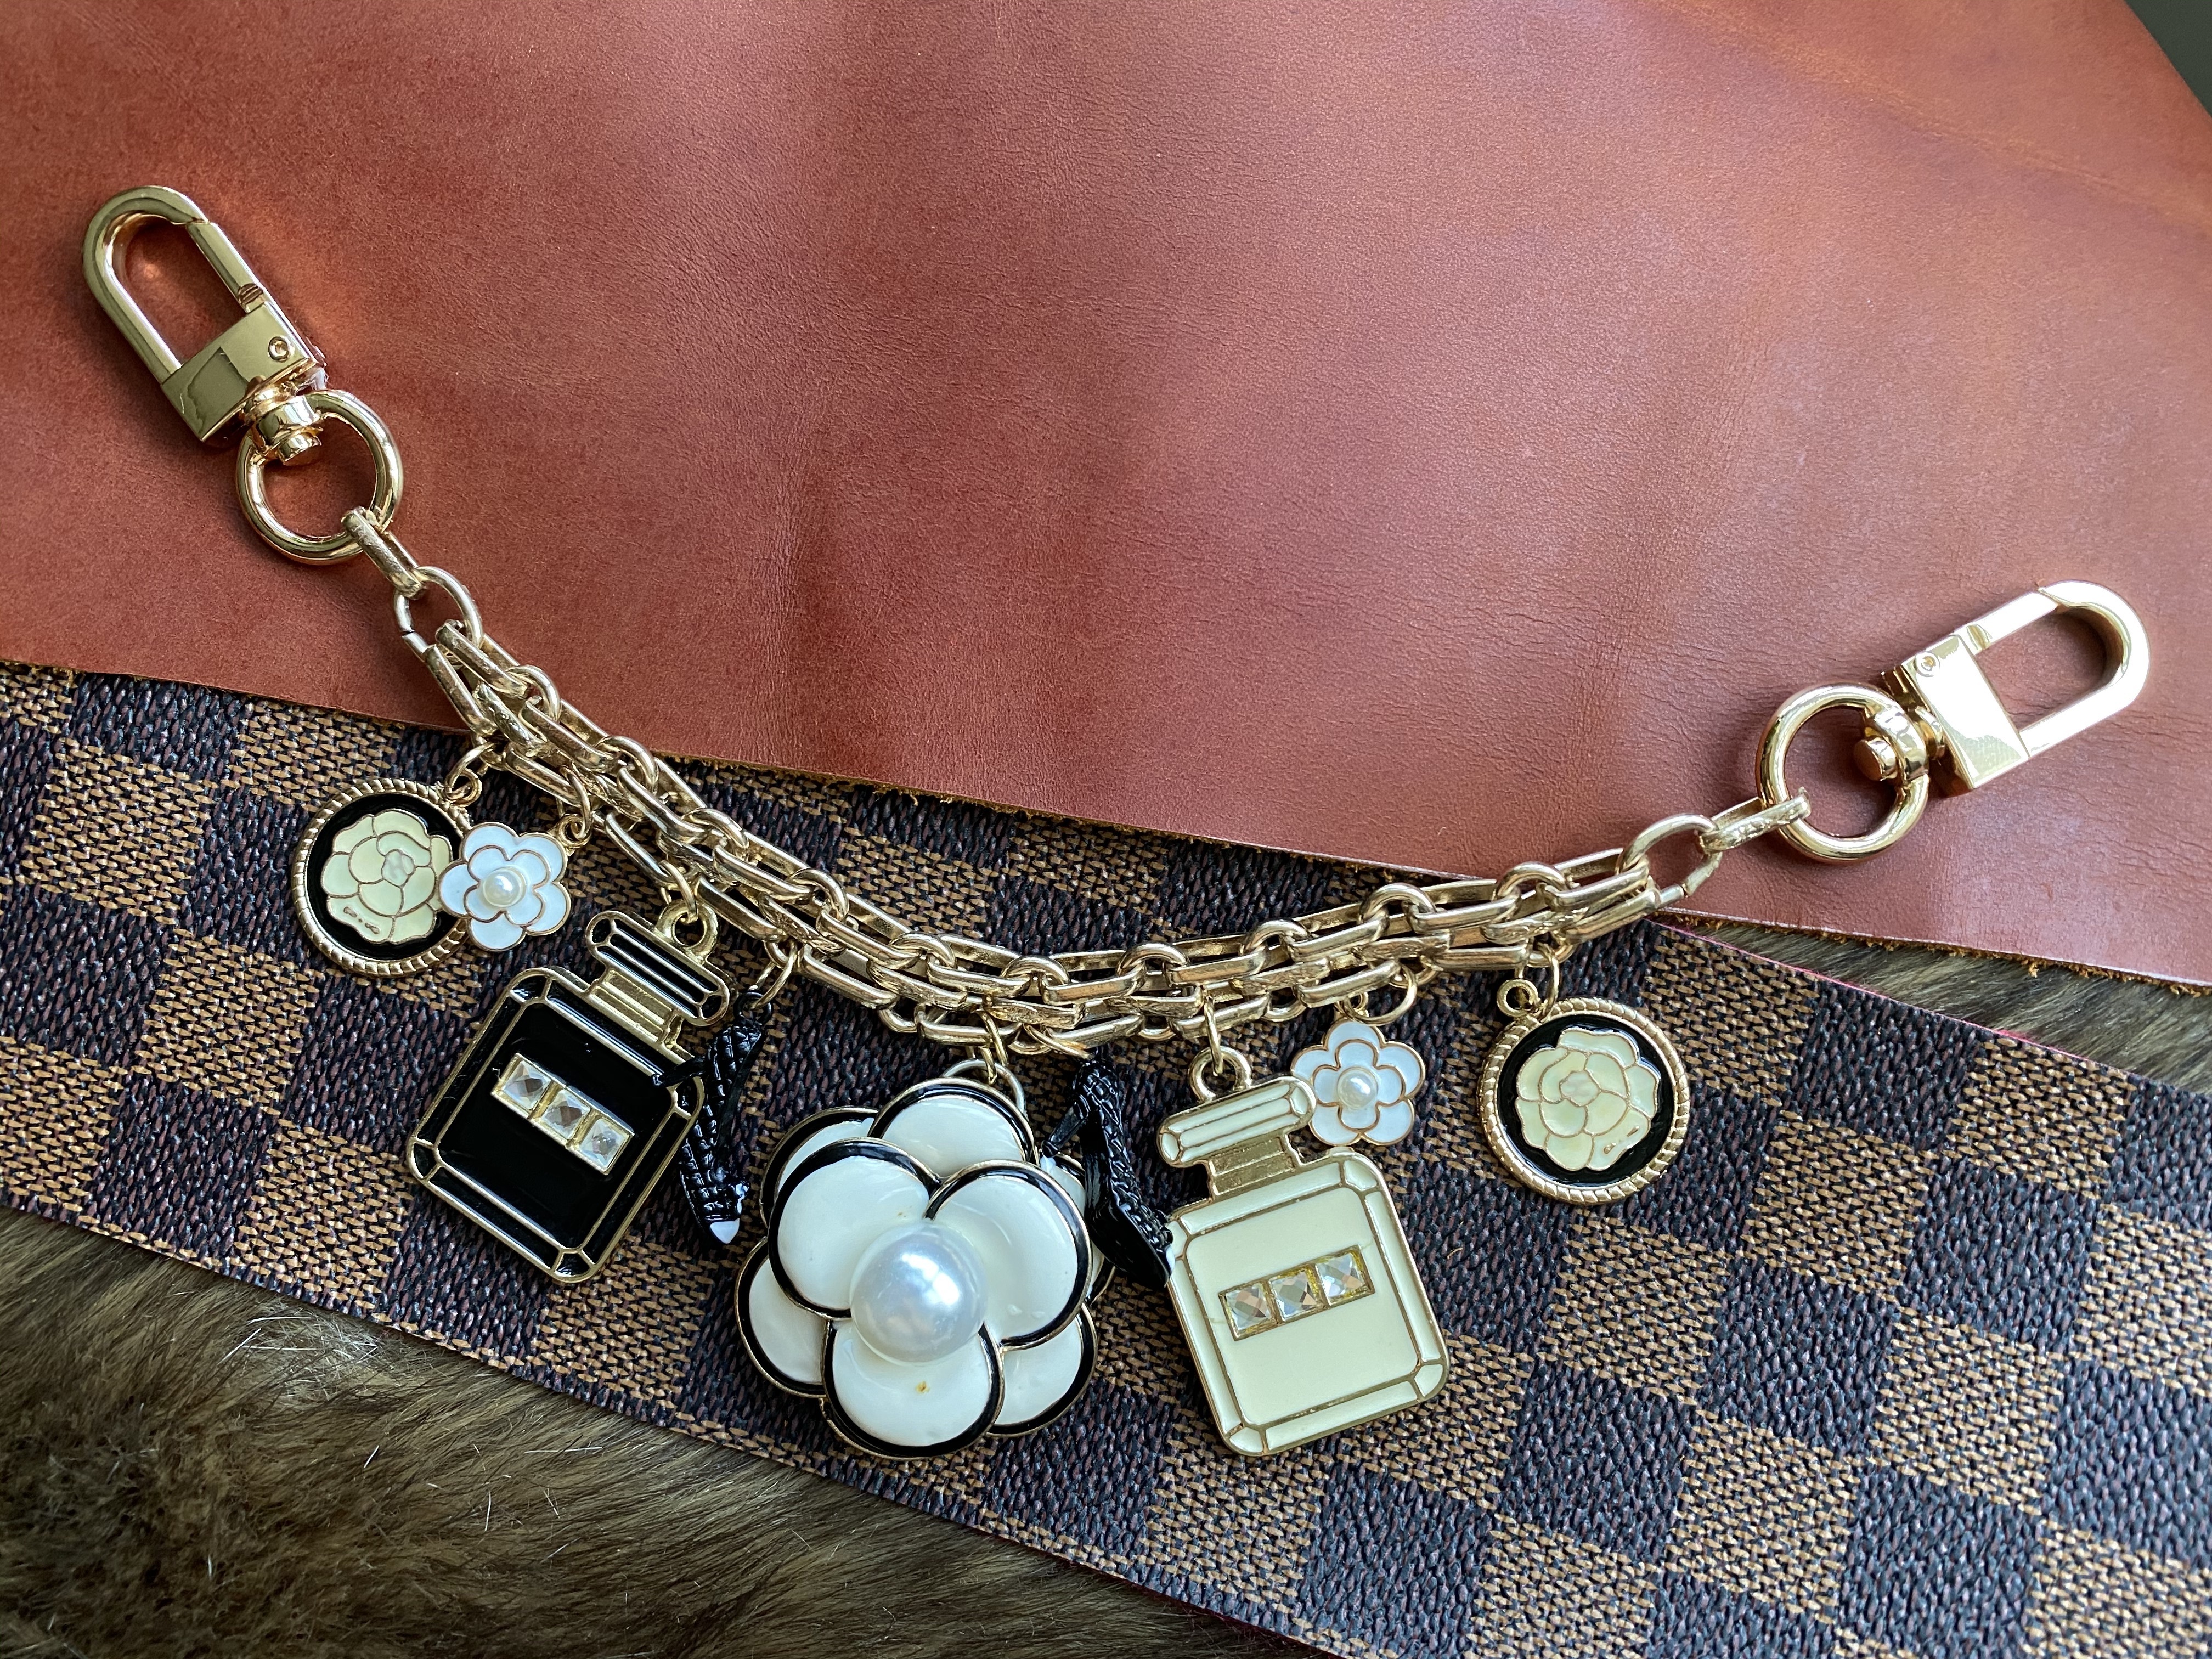 Luxury Clutch Charm Designed Bag Charm Collection High Quality Accessory